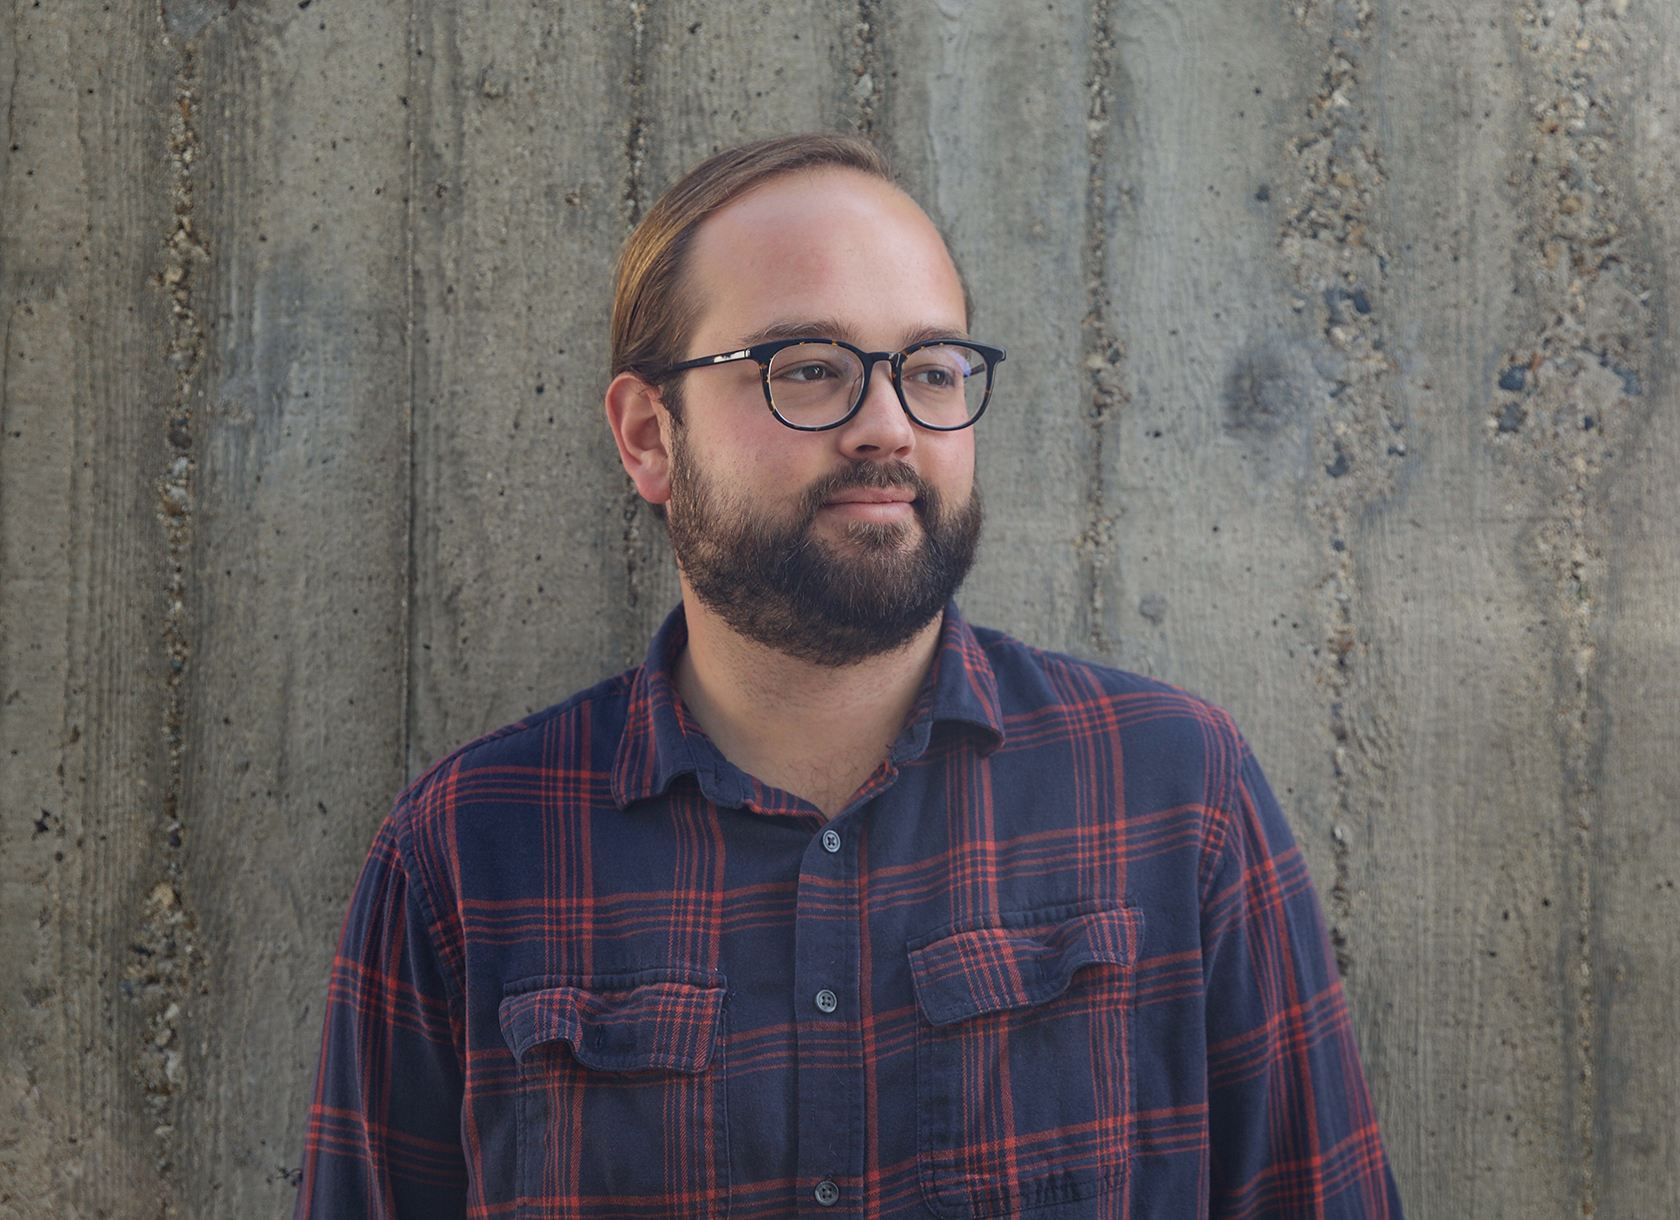 Bearded white man wearing plaid shirt and glasses looks to the right